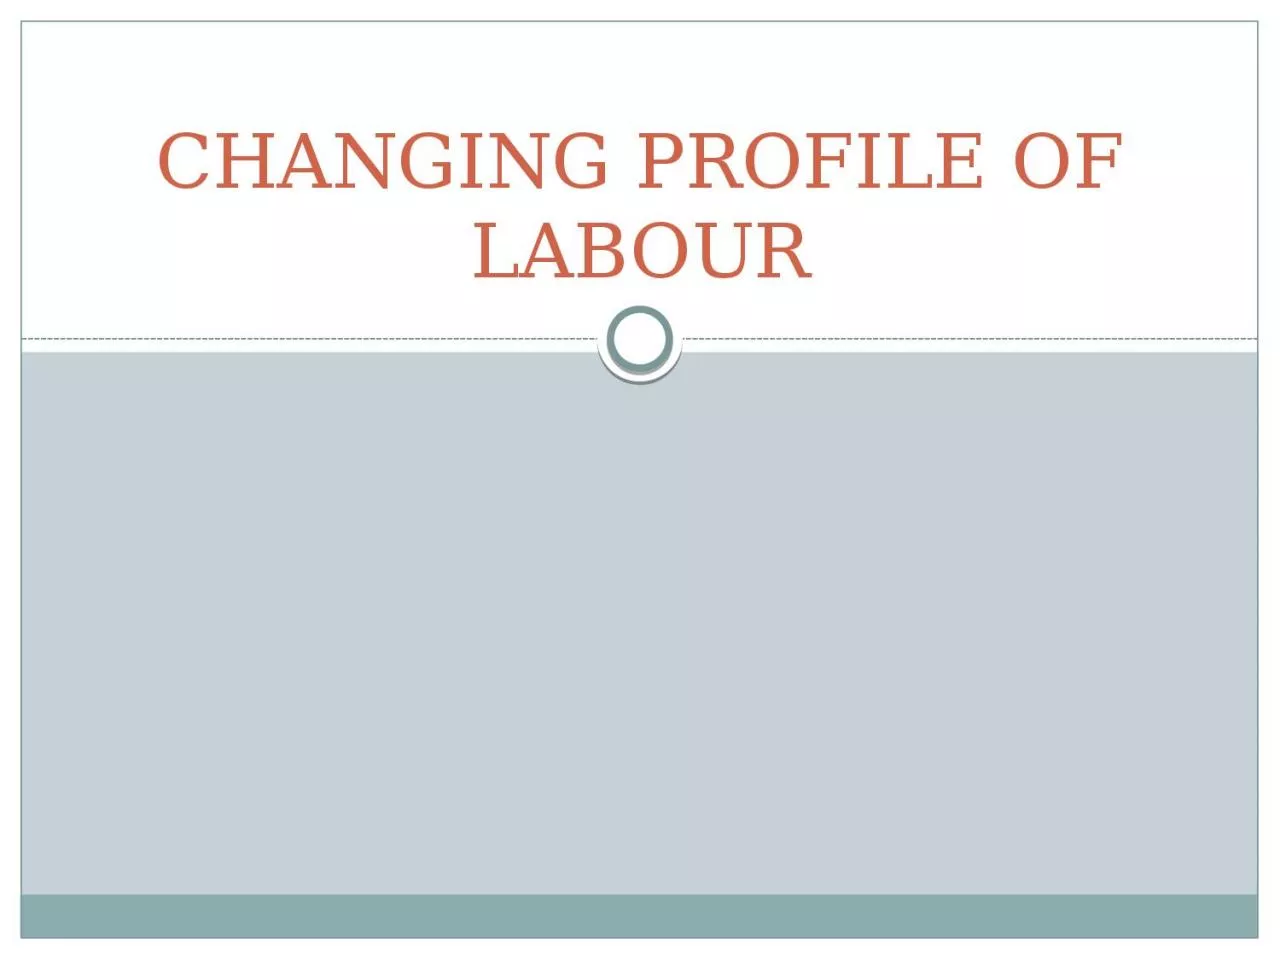 CHANGING PROFILE OF LABOUR